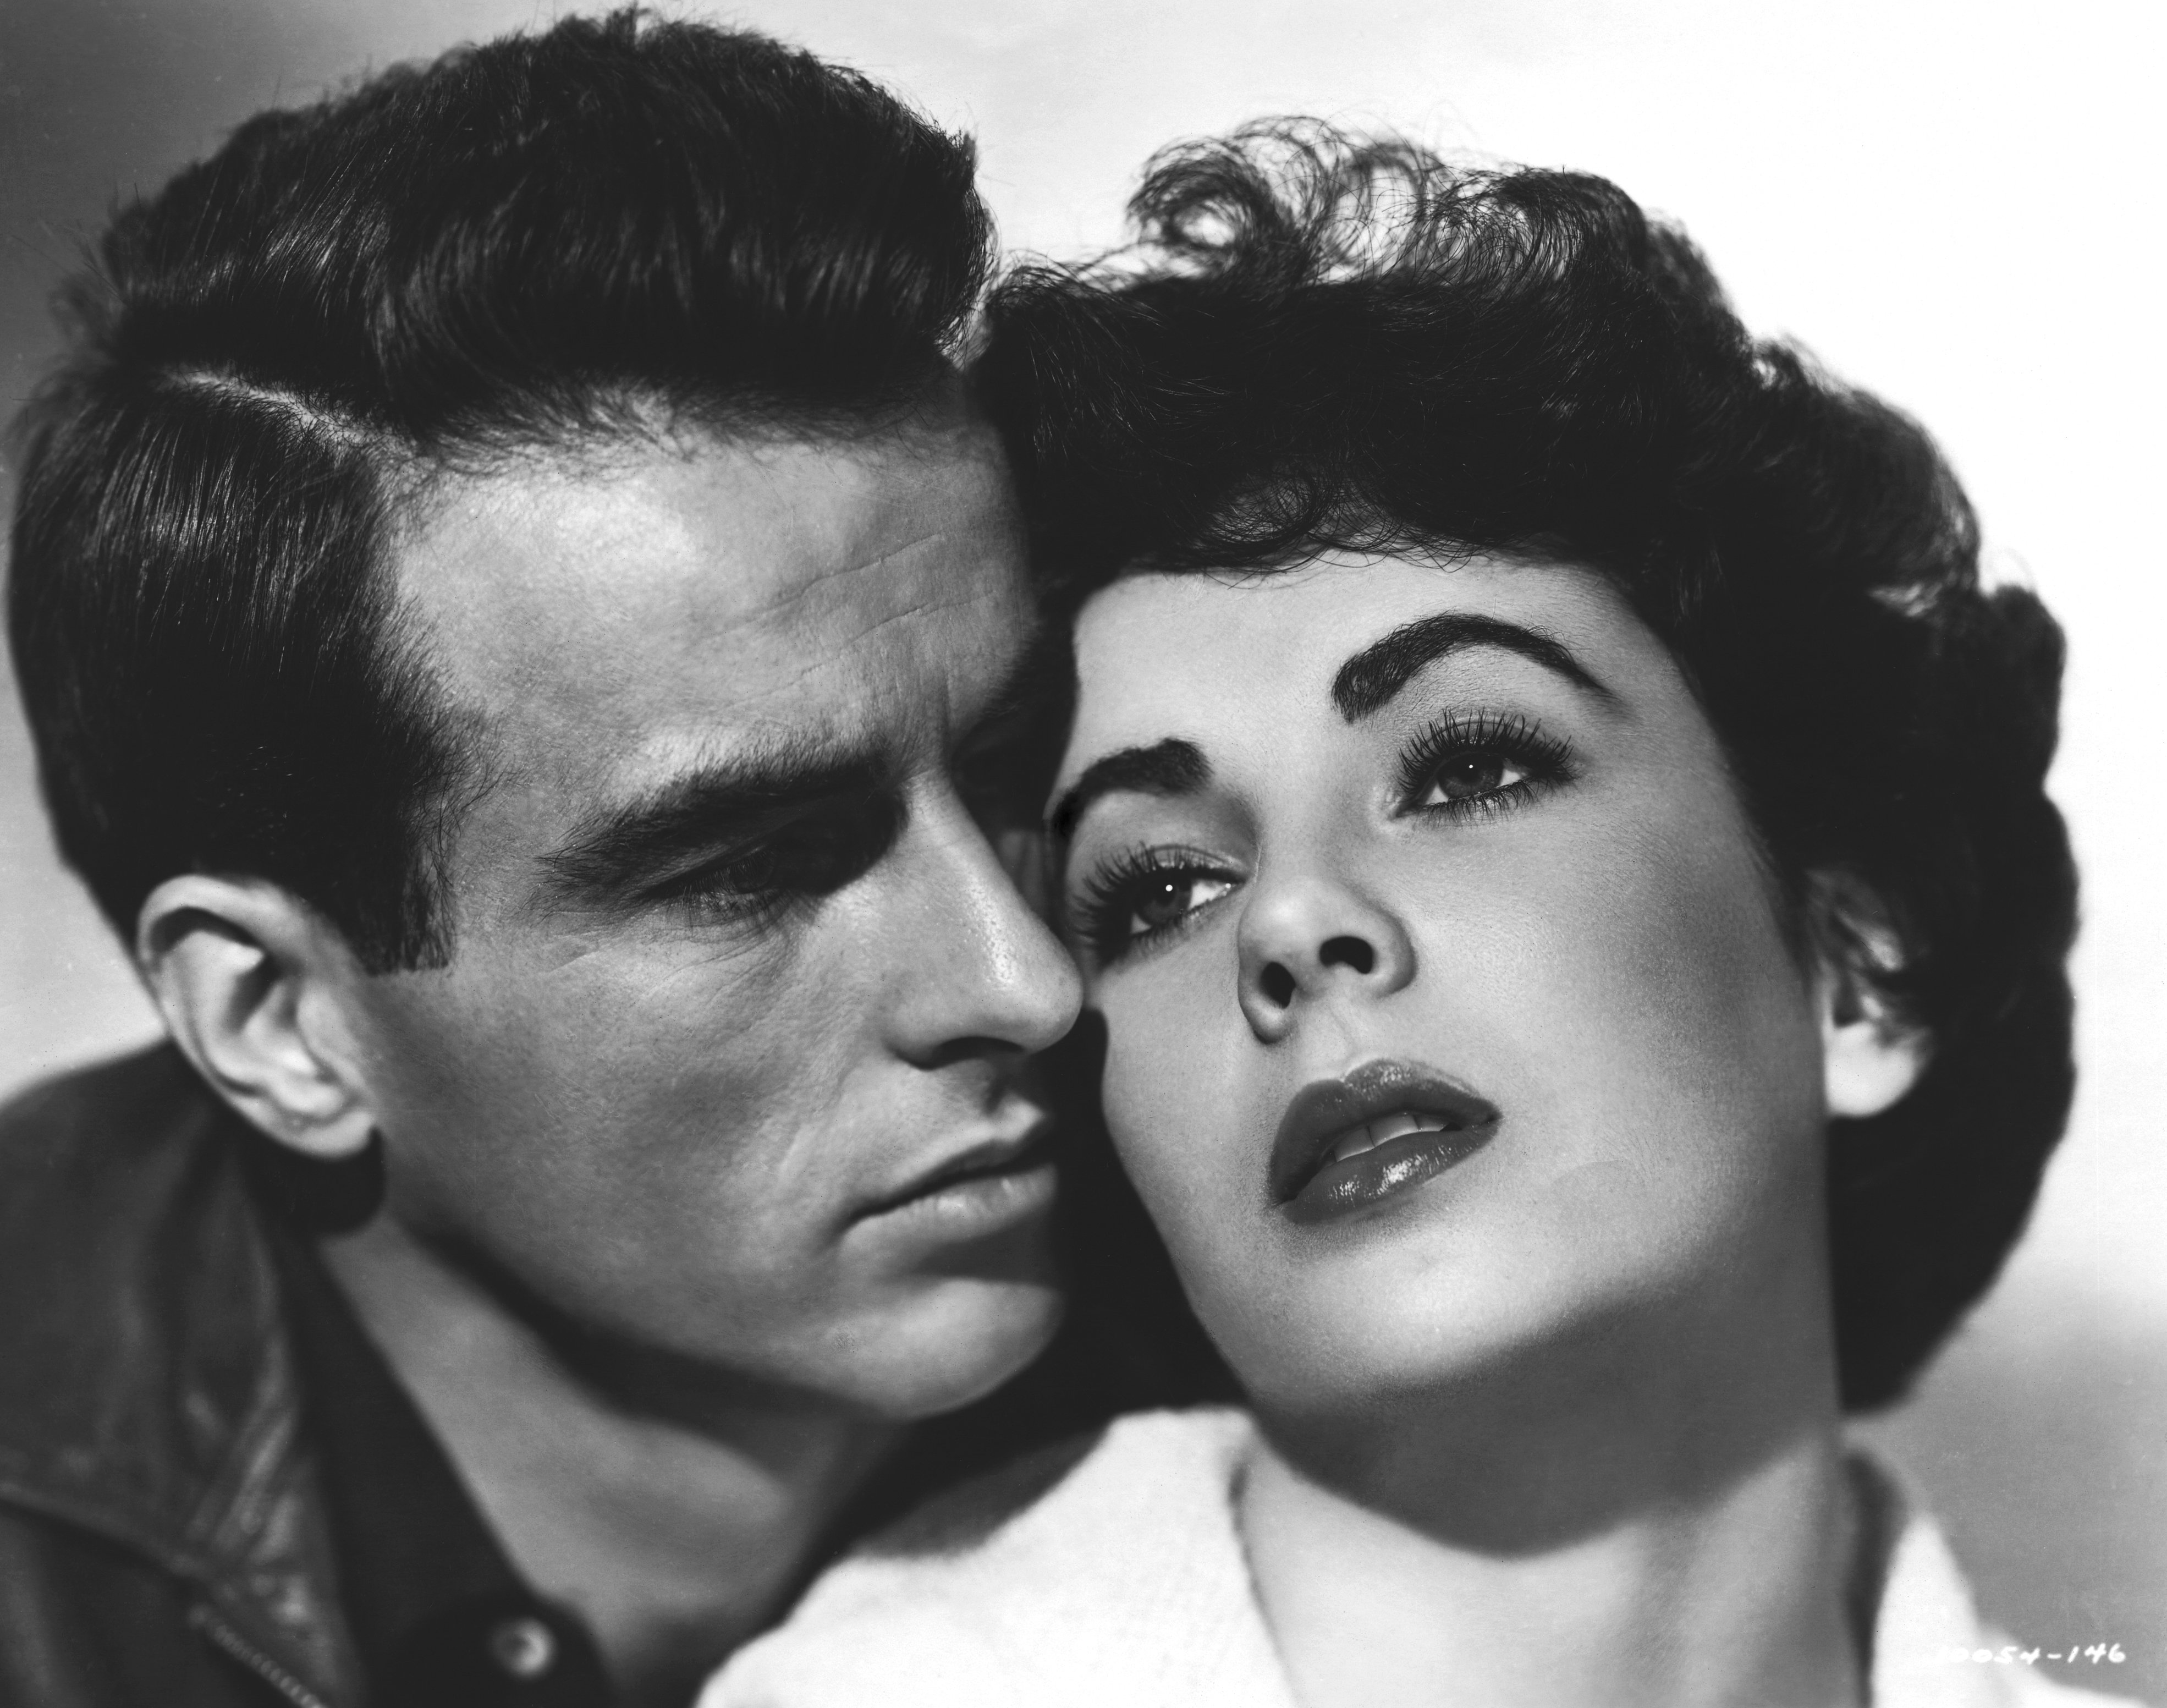 Montgomery Clift and Elizabeth Taylor in the 1951 film "A Place in the Sun" | Photo: John Springer Collection/CORBIS/Corbis via Getty Images